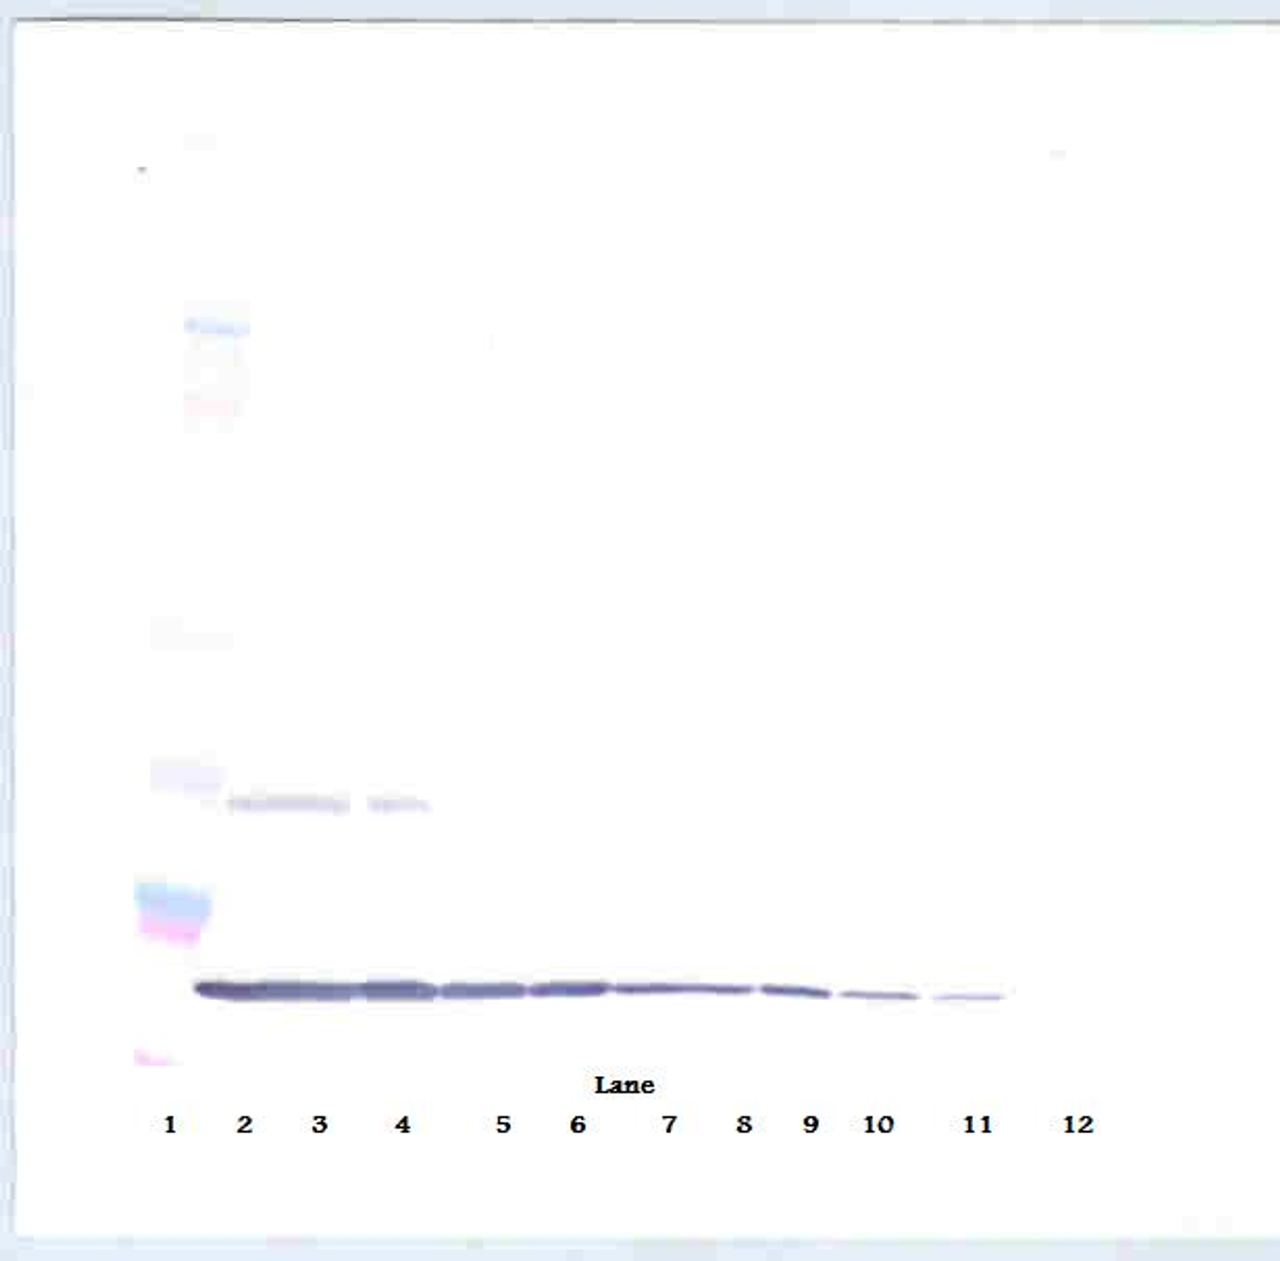 To detect hIL-10 by Western Blot analysis this antibody can be used at a concentration of 0.1 - 0.2 ug/ml. Used in conjunction with compatible secondary reagents the detection limit for recombinant hIL-10 is 1.5 - 3.0 ng/lane, under either reducing or non-reducing conditions.